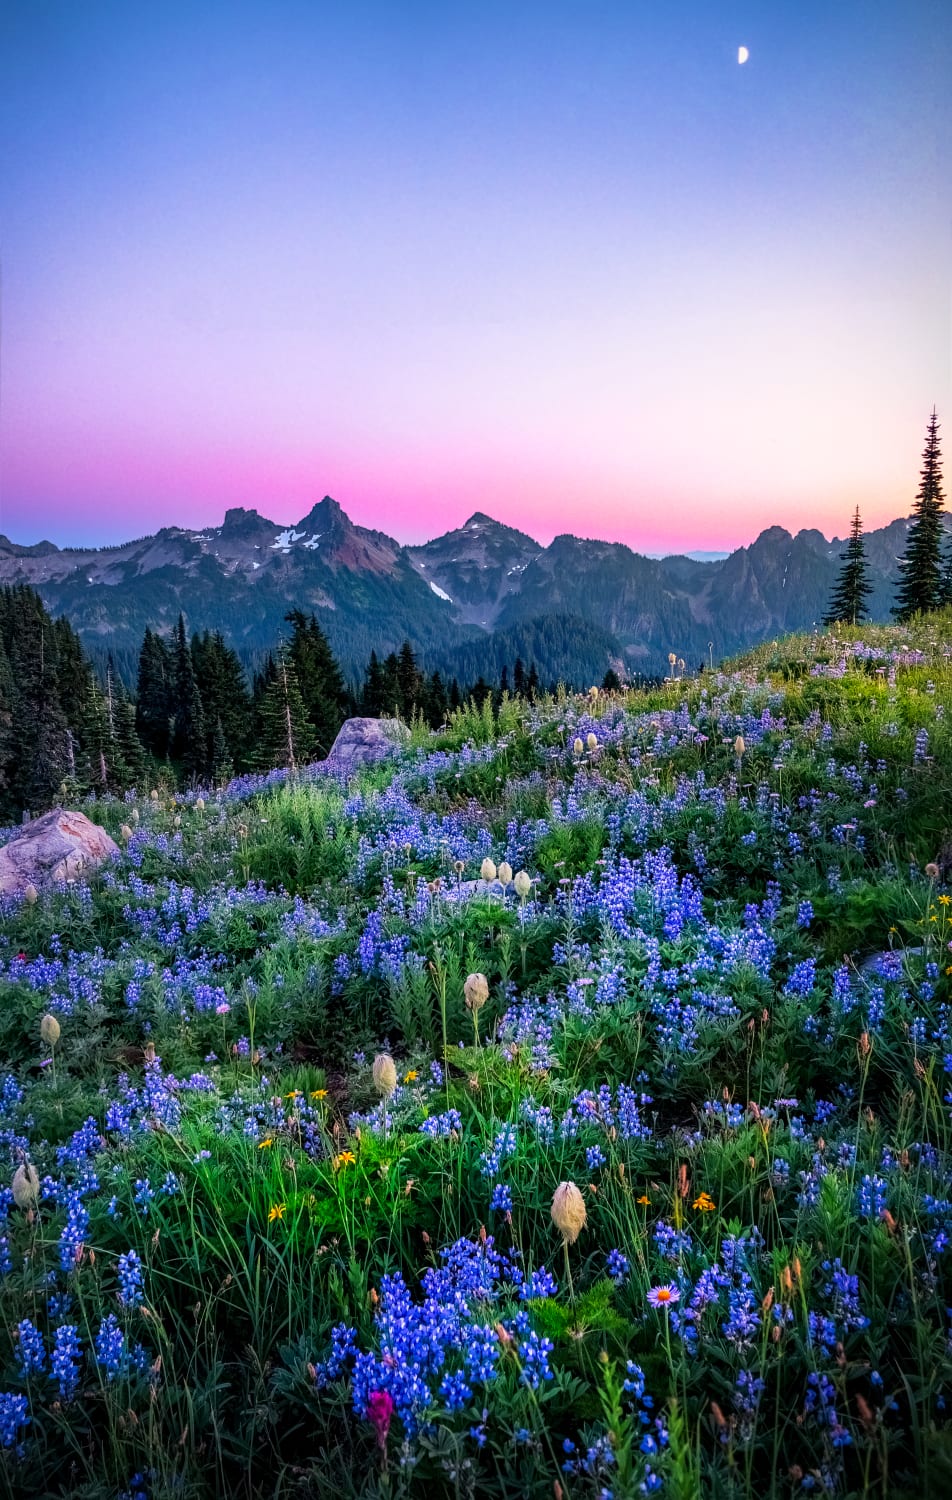 Spent sunset up at Mt Rainier- it is by far one of the most enchanting places I've ever visited!